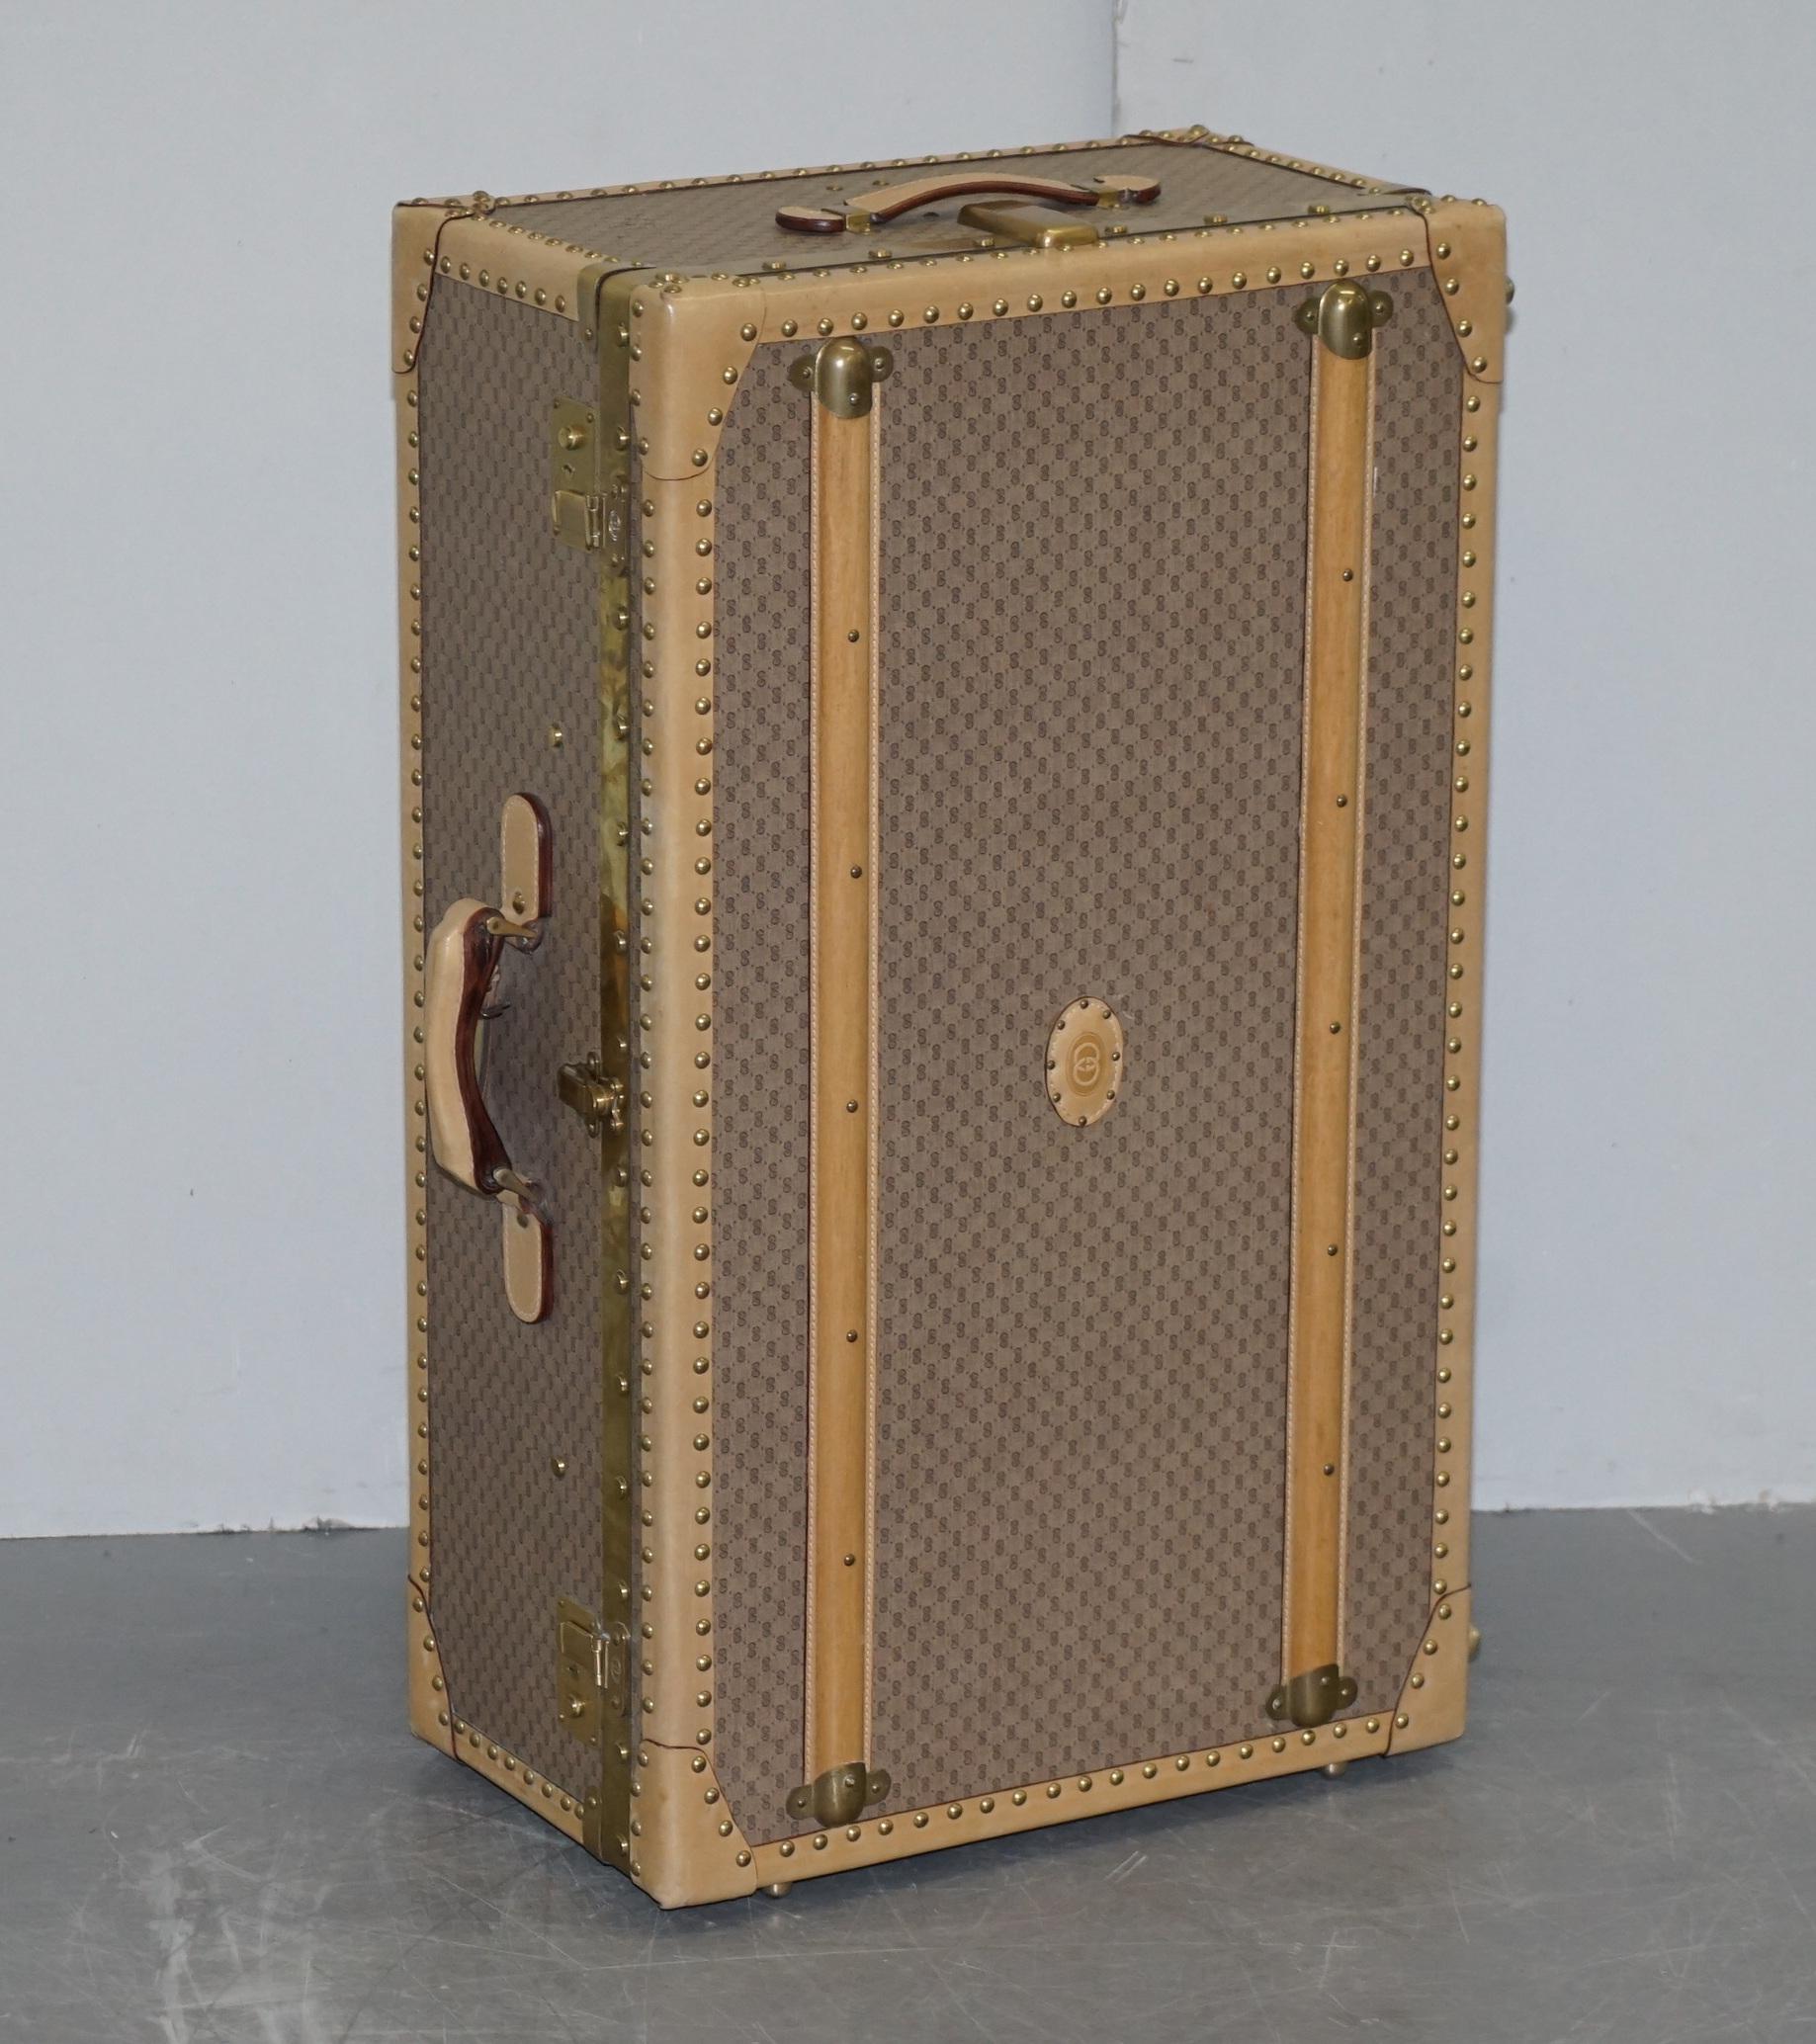 We are delighted to offer this very rare and highly collectable vintage Gucci GG Supreme Monogram steamer trunk wardrobe suitcase

This is a very rare find which is absolutely exquisite quality. It can be used as its intended function which is a